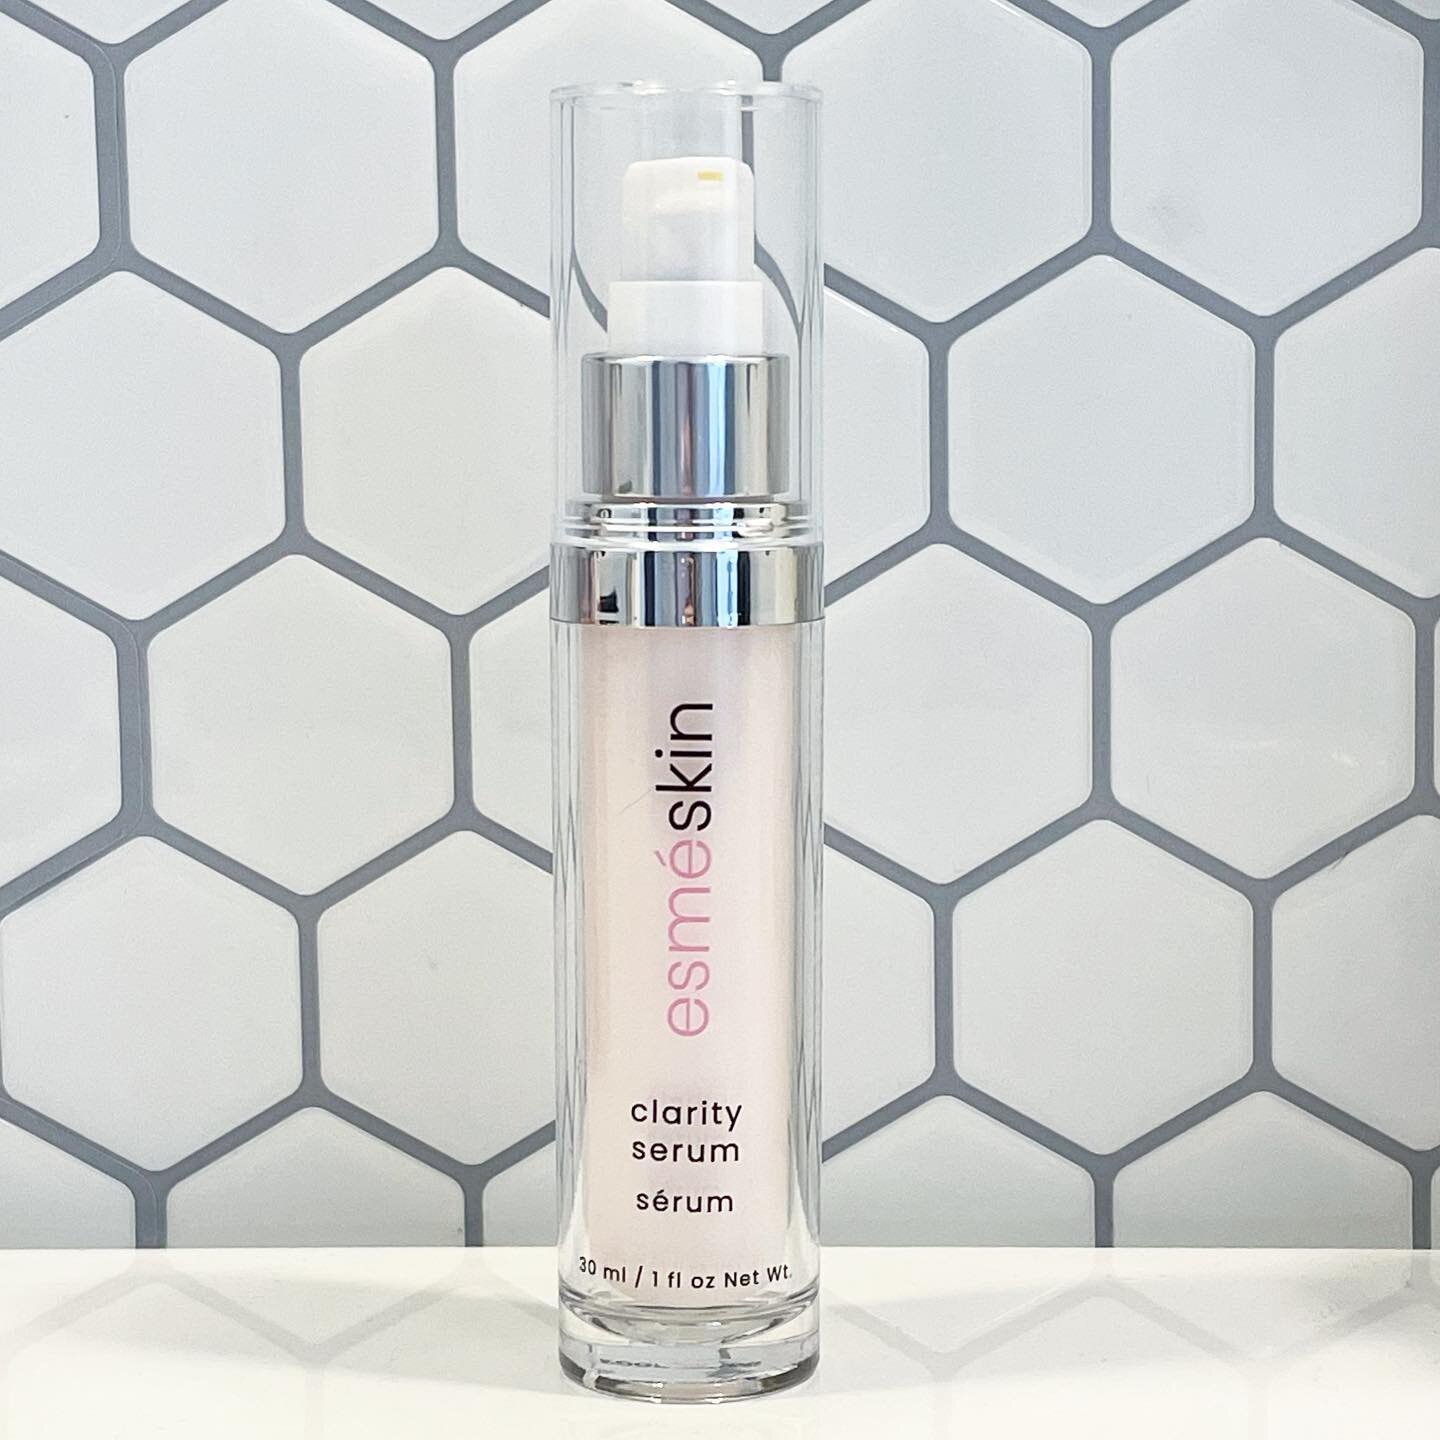 Meet one of the first products from @esme_skin - Clarity Serum 🤍

This clarifying serum contains exfoliating Lactic Acid, purifying Salicylic Acid, illuminating Azelaic Acid and Niacinamide.

Sulphur and Tomato Fruit Extracts nourish and clarify whi